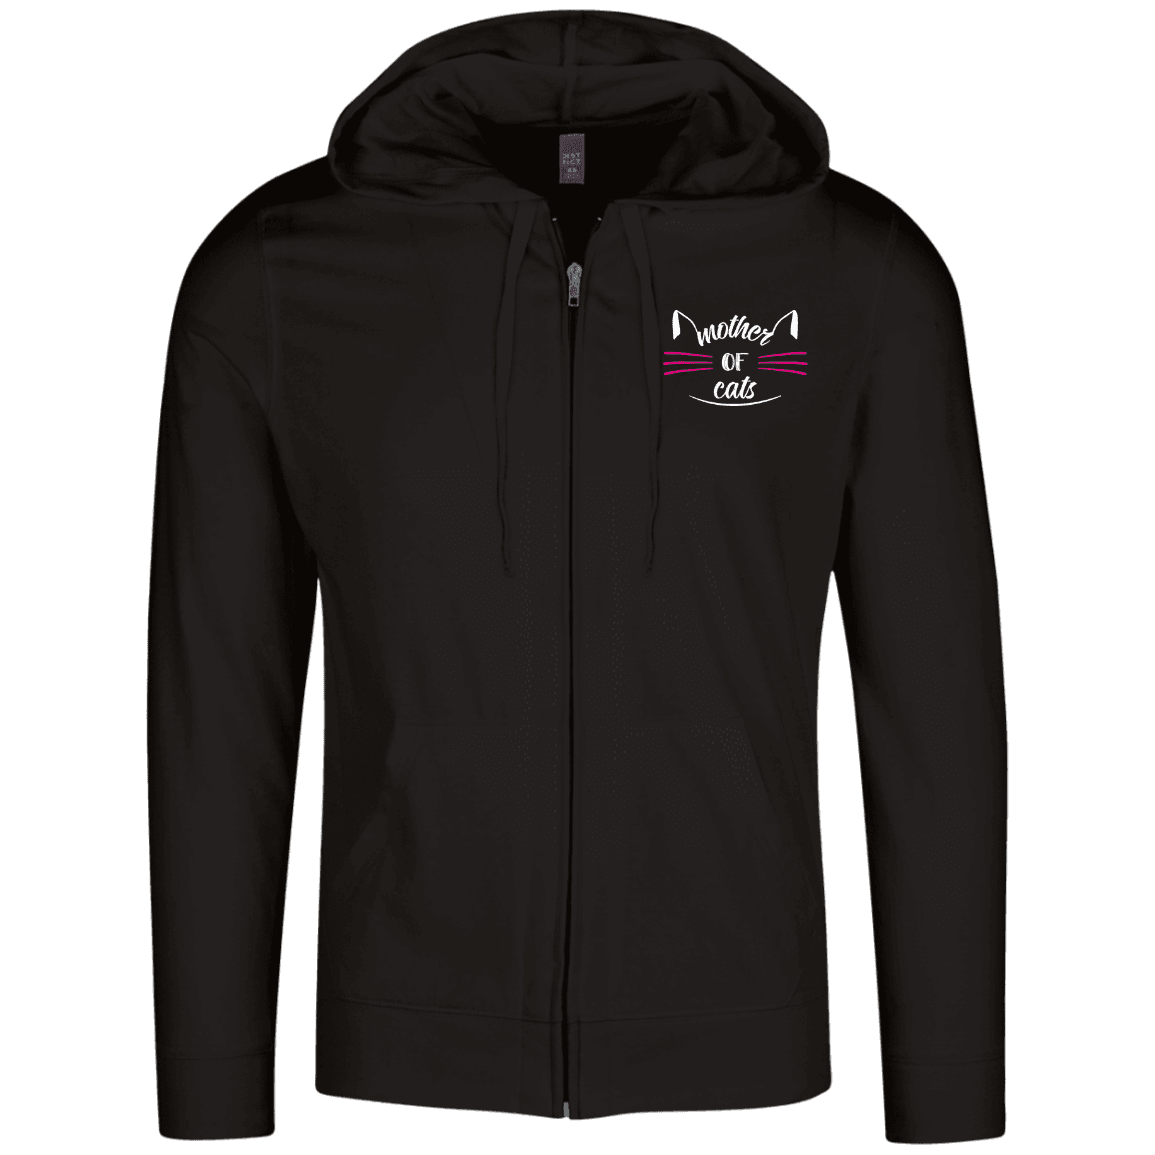 Designs by MyUtopia Shout Out:Mother of Cats Embroidered Lightweight Full Zip Hoodie,Black / X-Small,Sweatshirts